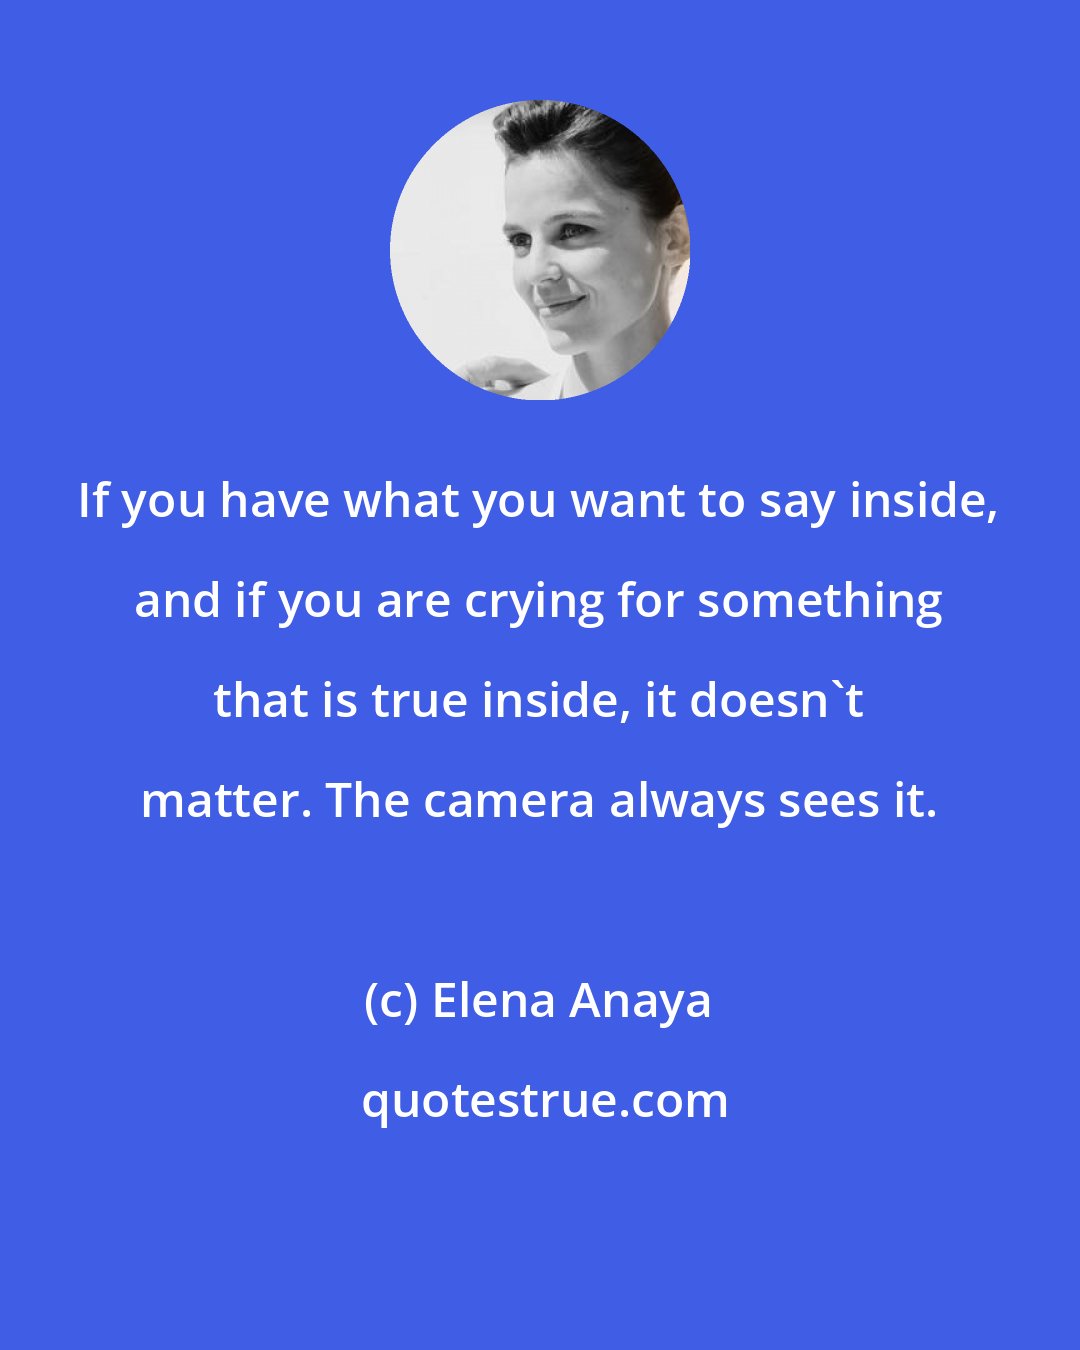 Elena Anaya: If you have what you want to say inside, and if you are crying for something that is true inside, it doesn't matter. The camera always sees it.